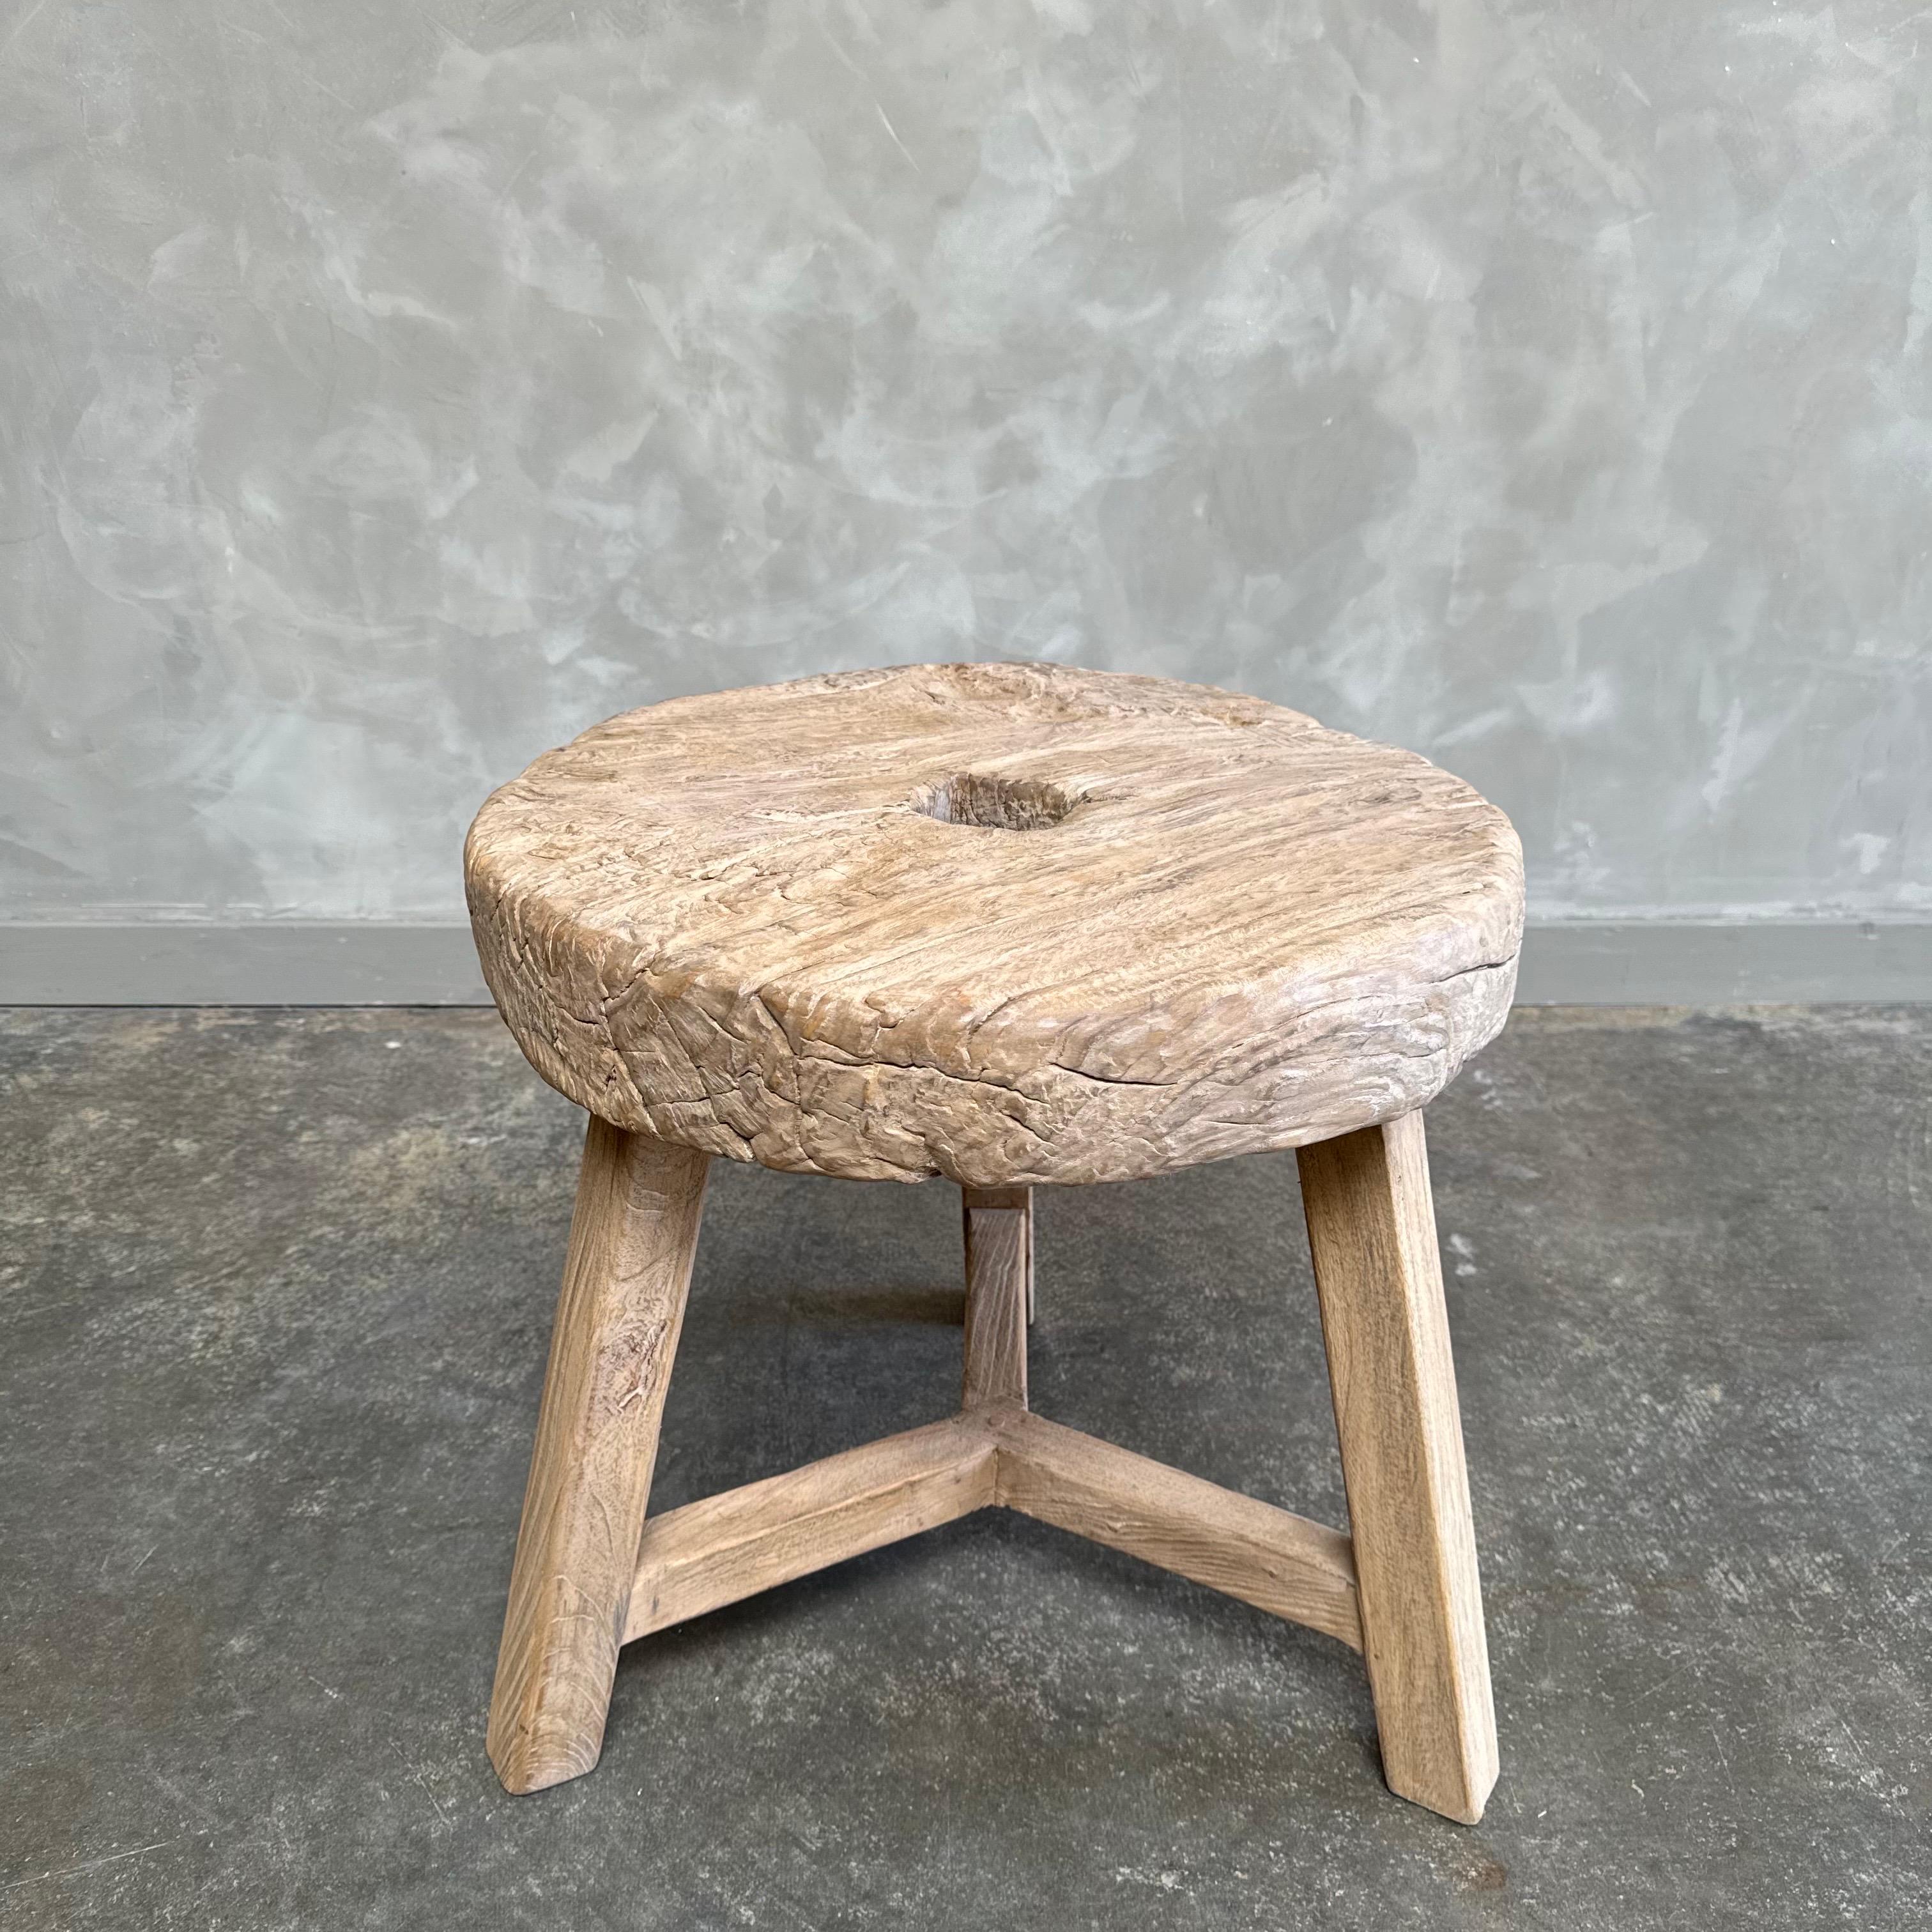 Antique wheel side table. This vintage elm wood wheel table is finished with medium to dark stain. The table is solid and sturdy ready for everyday use. Use as a side table, stool, powder room to add vintage style to your home. One of a kind item.
